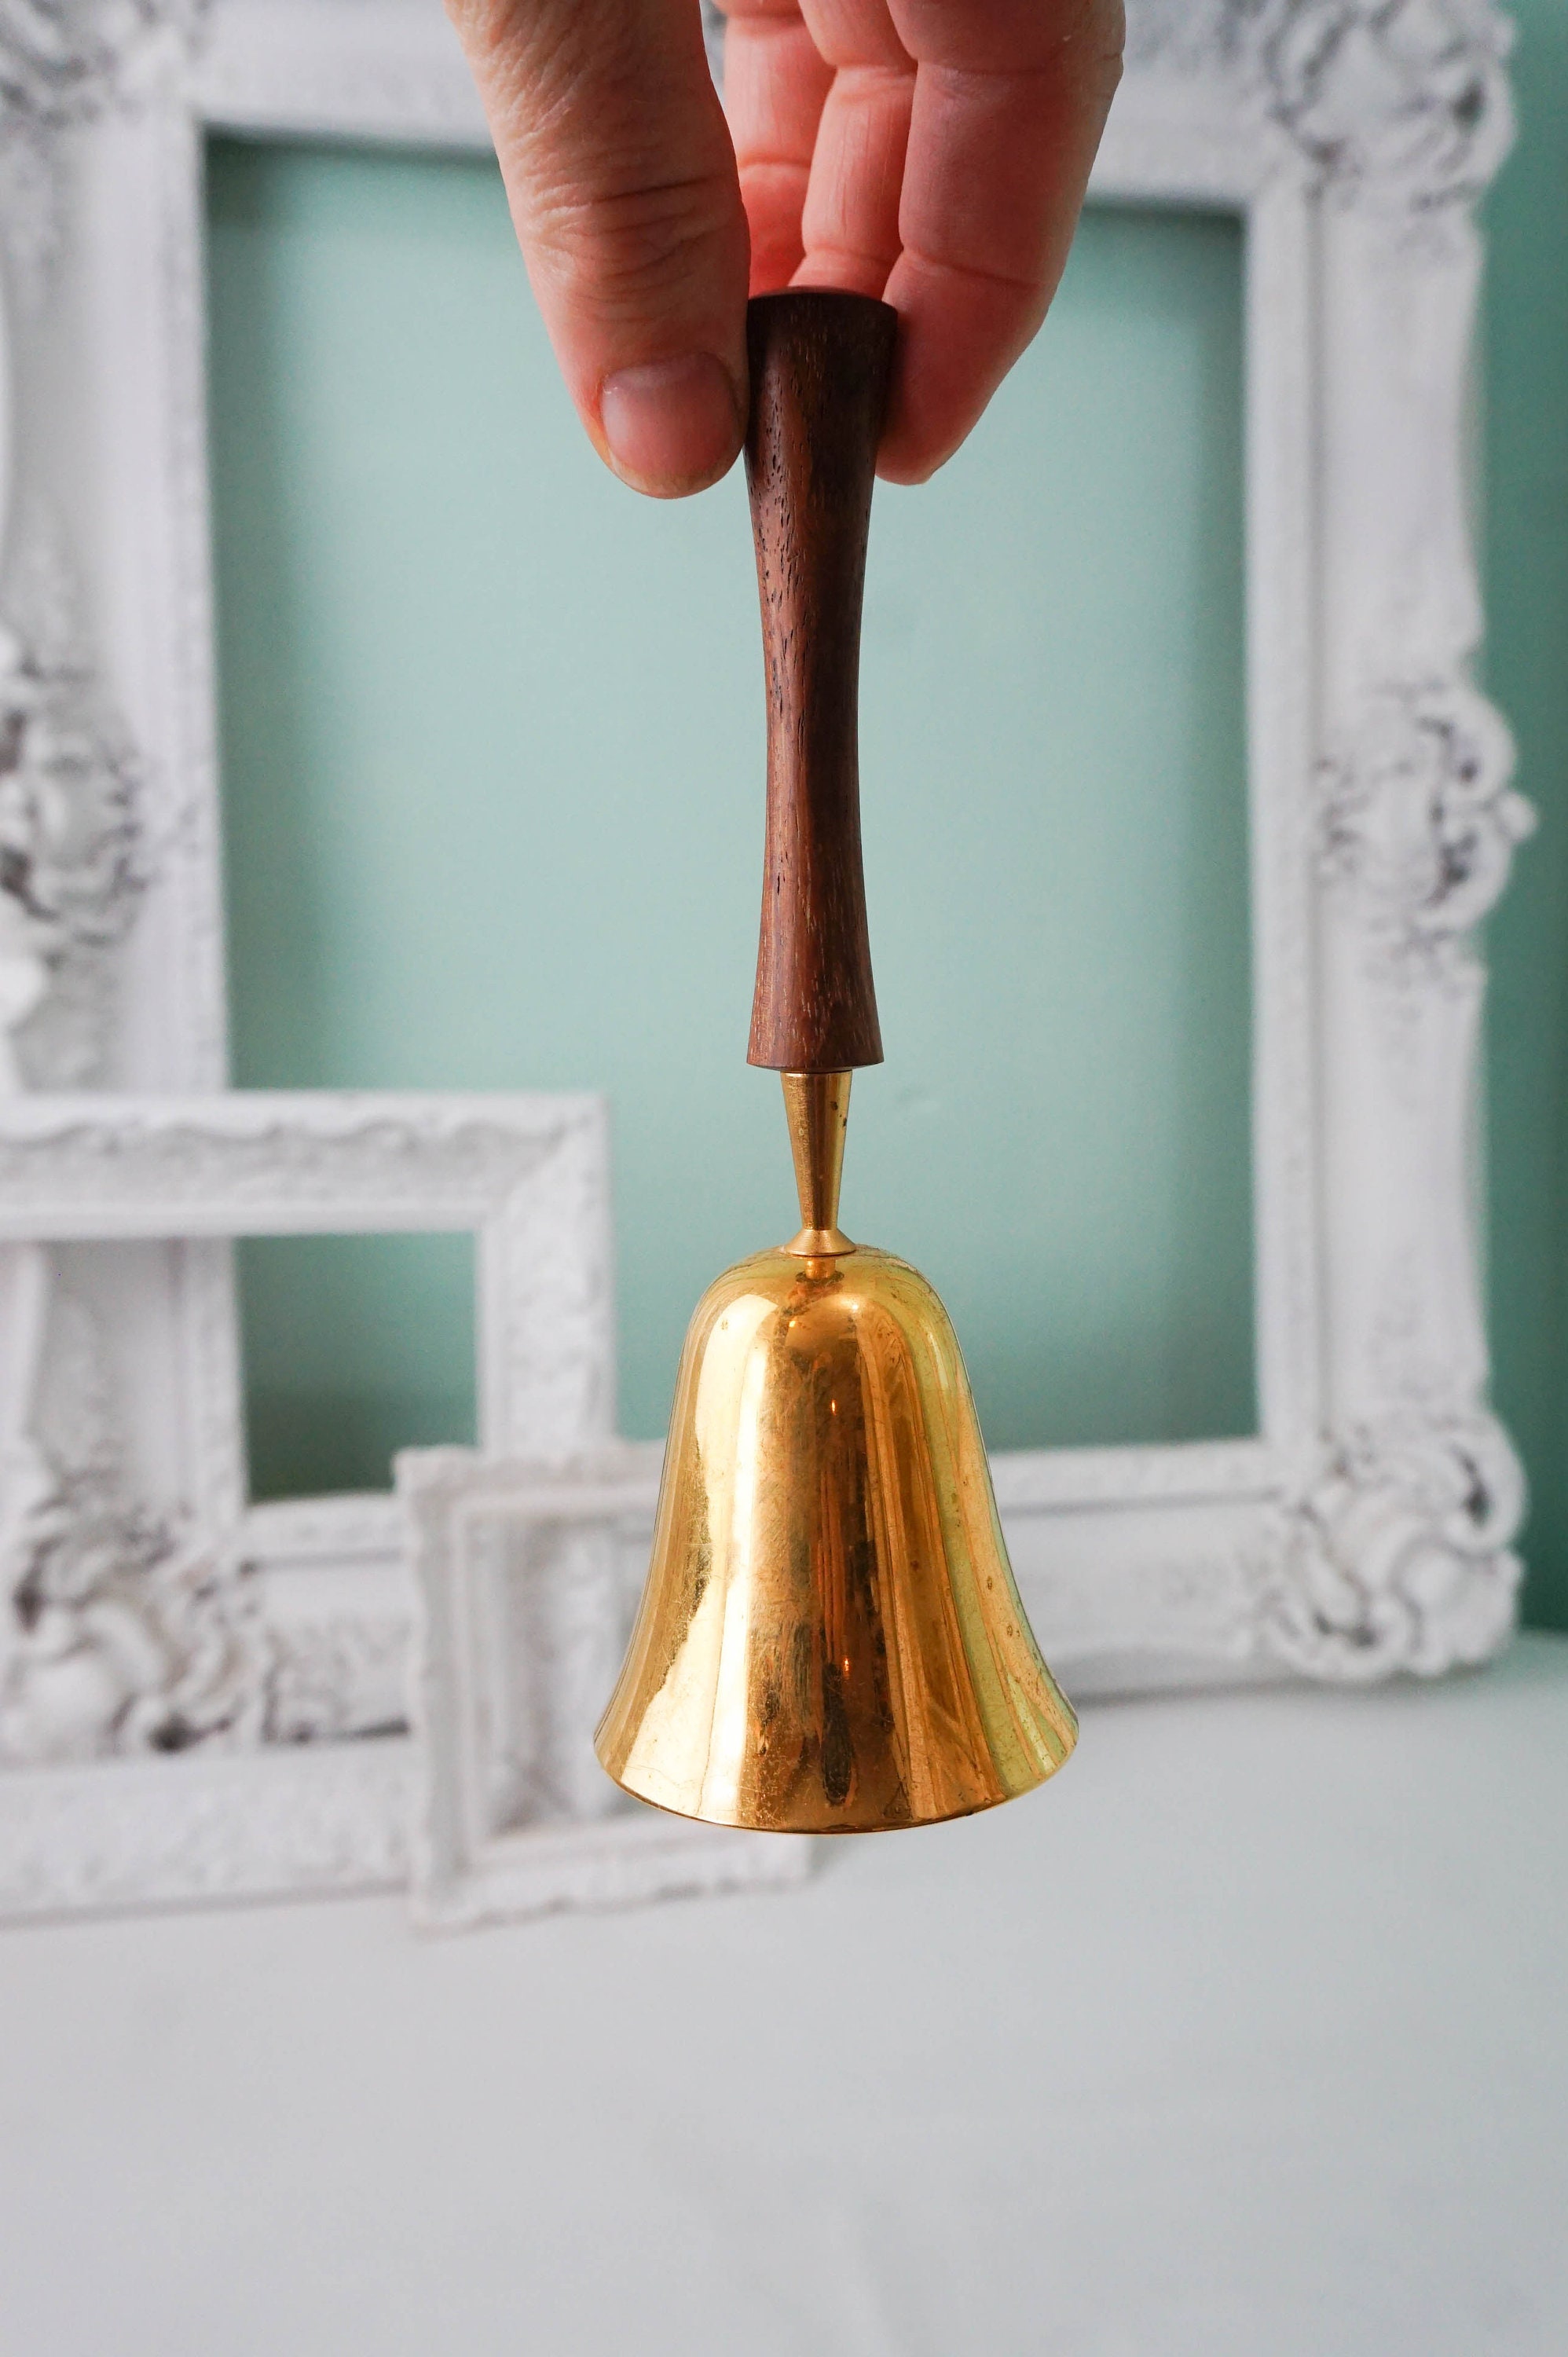 VINTAGE SMALL BELL WITH WOODEN HANDLE AND BRASS BOTTOM